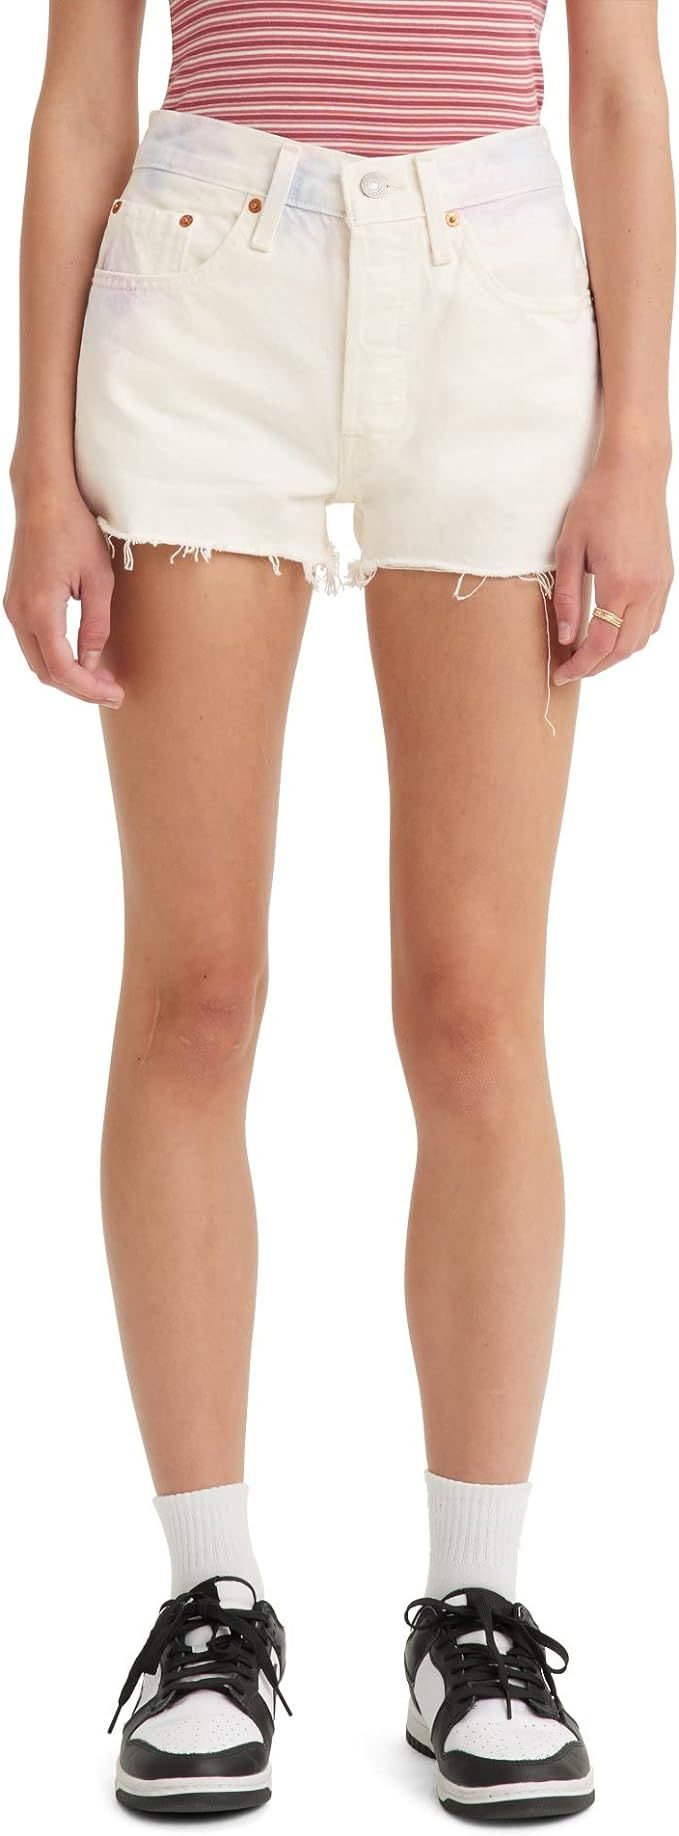 Levi's Women's 501 Original Shorts (Also Available in Plus) | Amazon (US)